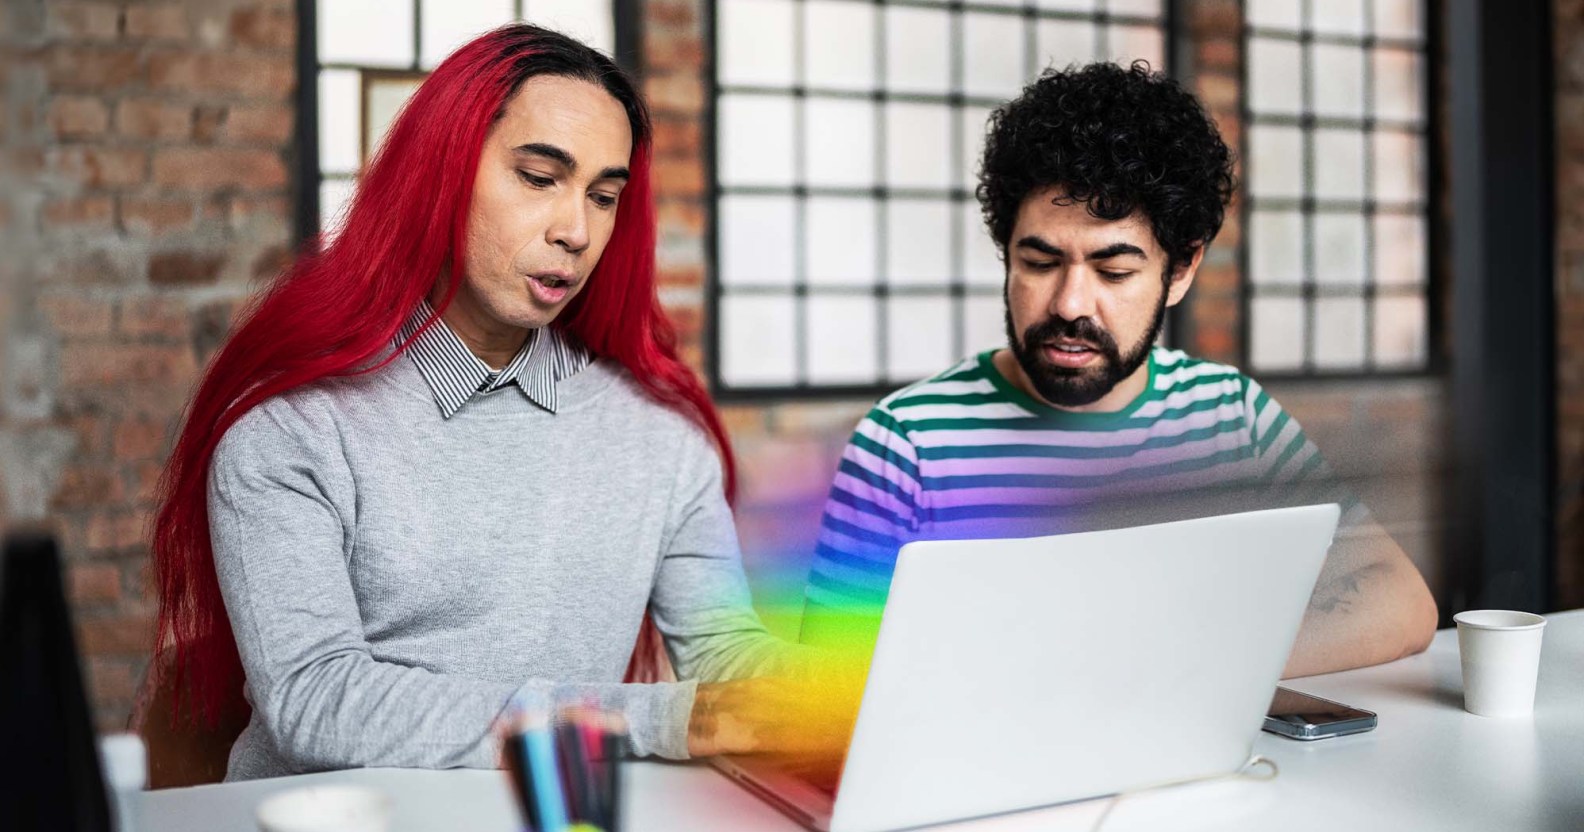 There is a feminine presenting person ont he left side of the photo. They have bright red hair and are wearing a grey shirt. Next to them is a masculine presenting person wearing a beard and a striped shirt. They are both looking down at a laptop computer that is emitting the pride flag colours.